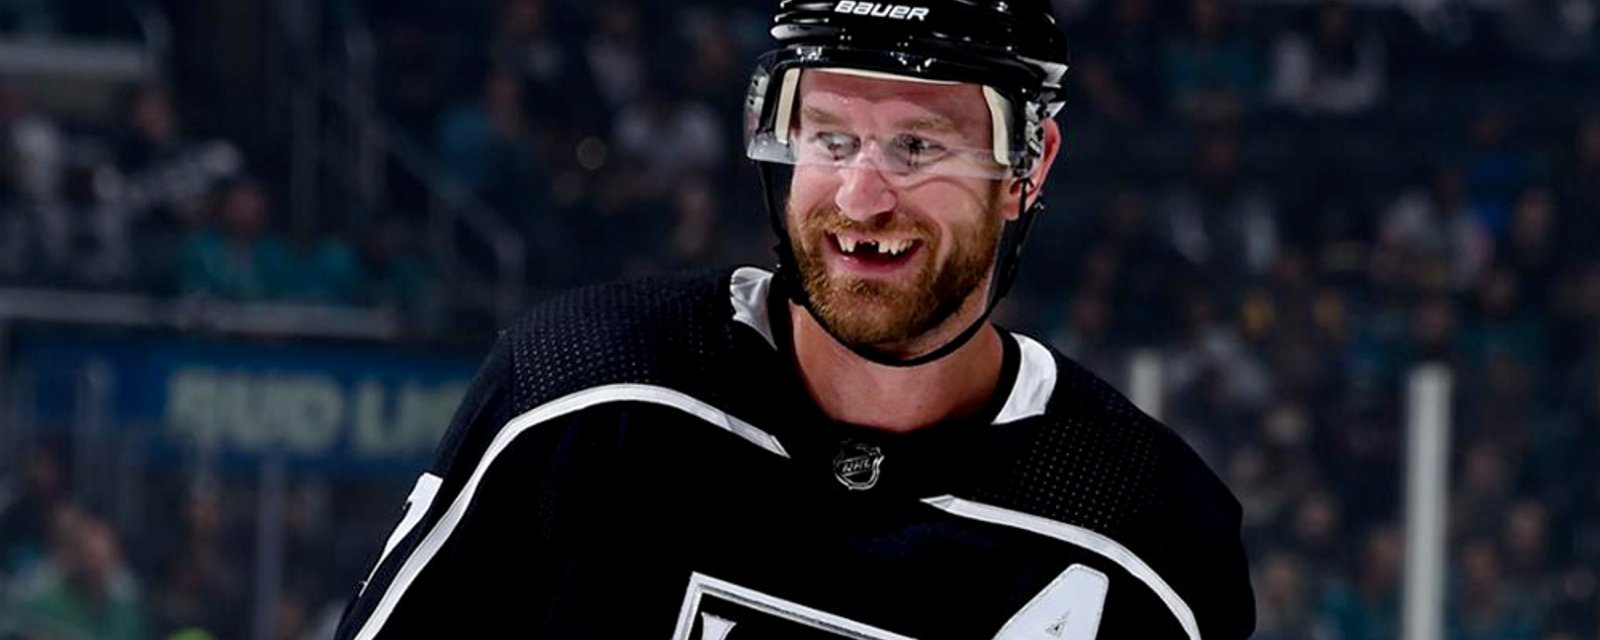 Jeff Carter announces he'll remain with the Penguins next season